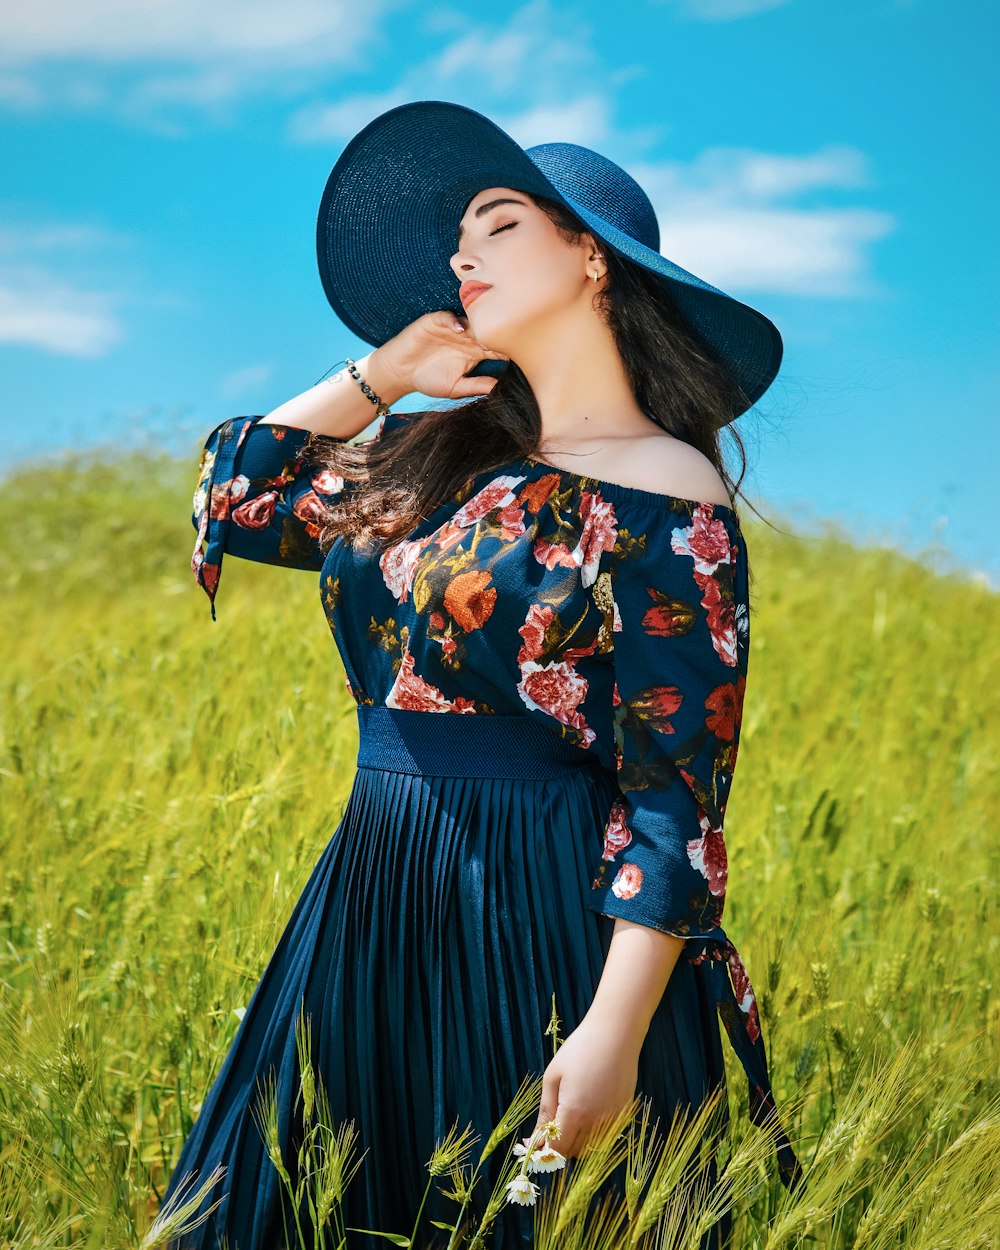 woman in blue and red floral dress wearing black hat standing on green grass field during